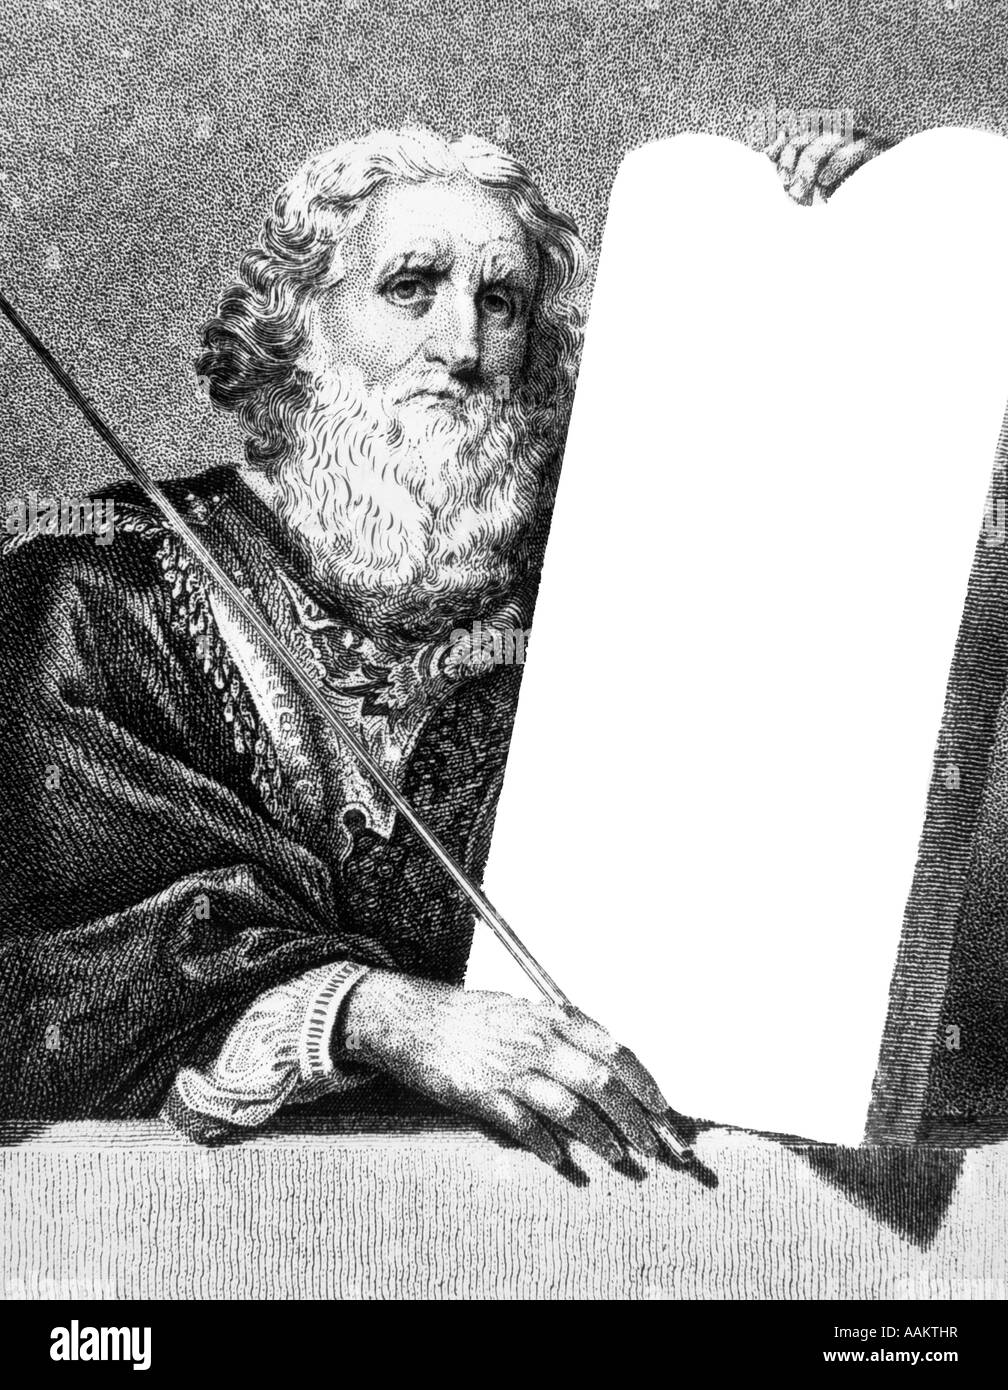 ENGRAVING OF MOSES HOLDING STONE TABLET Stock Photo